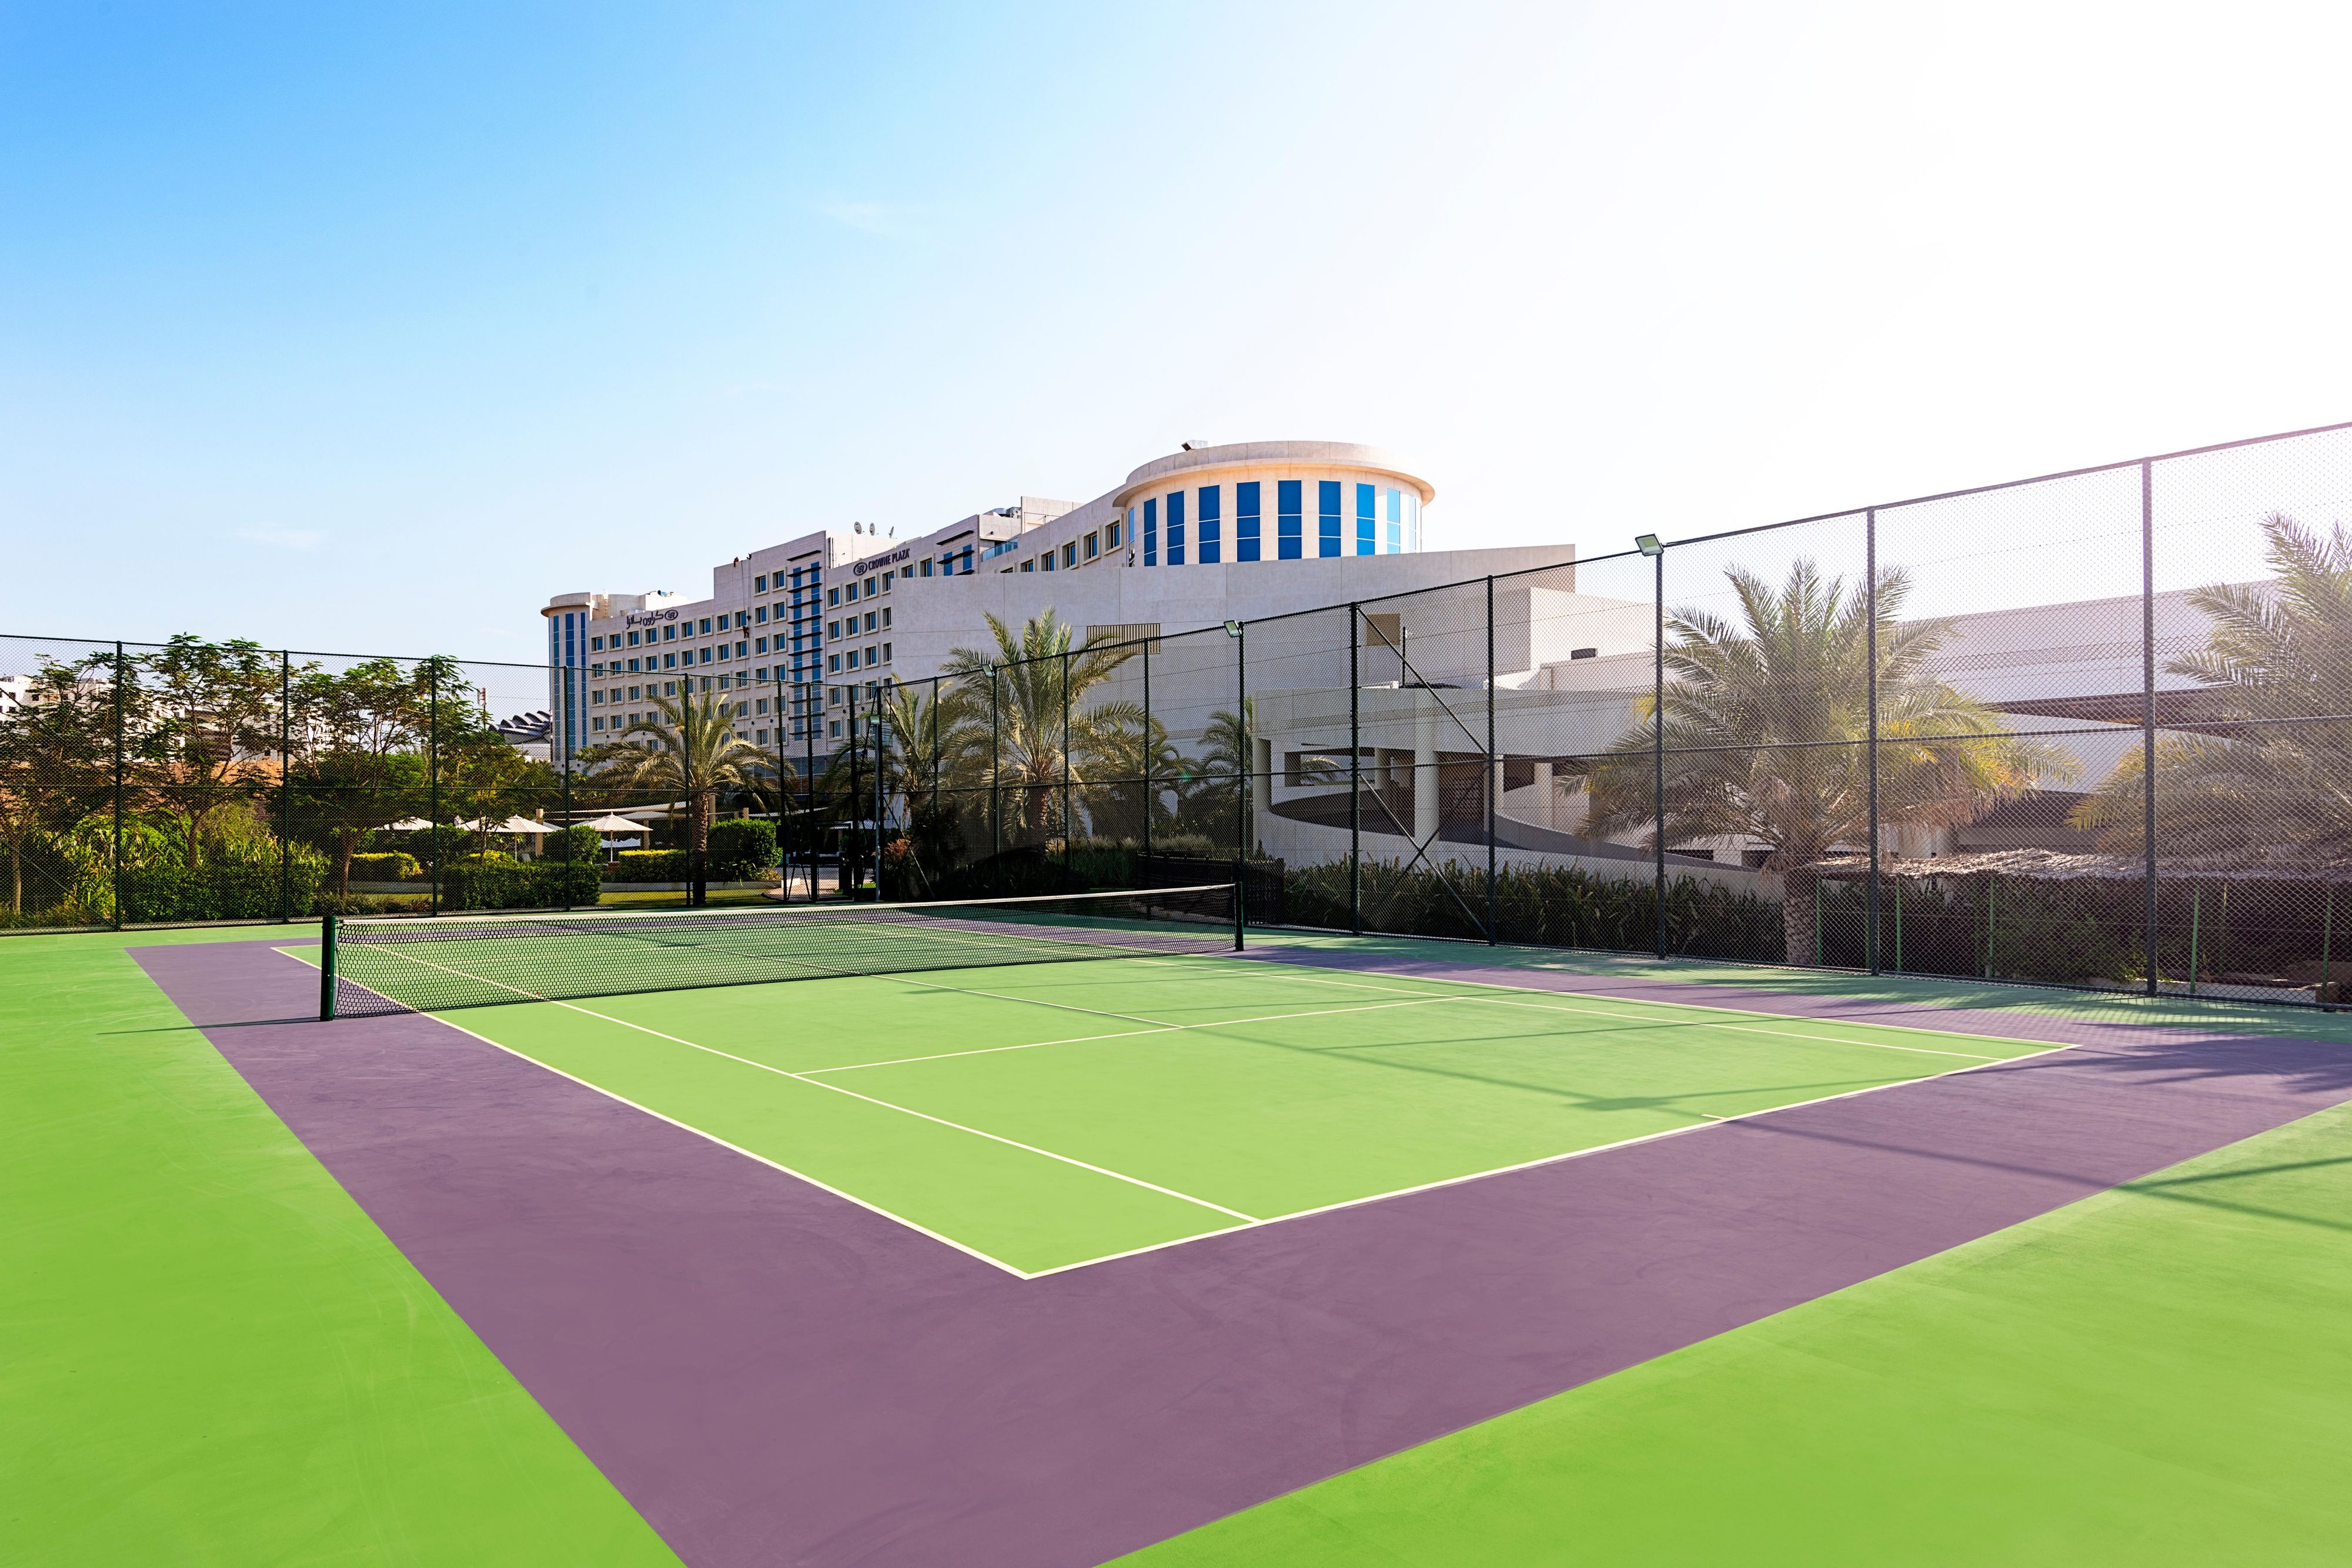 Tennis court with unique hotel and wadi views